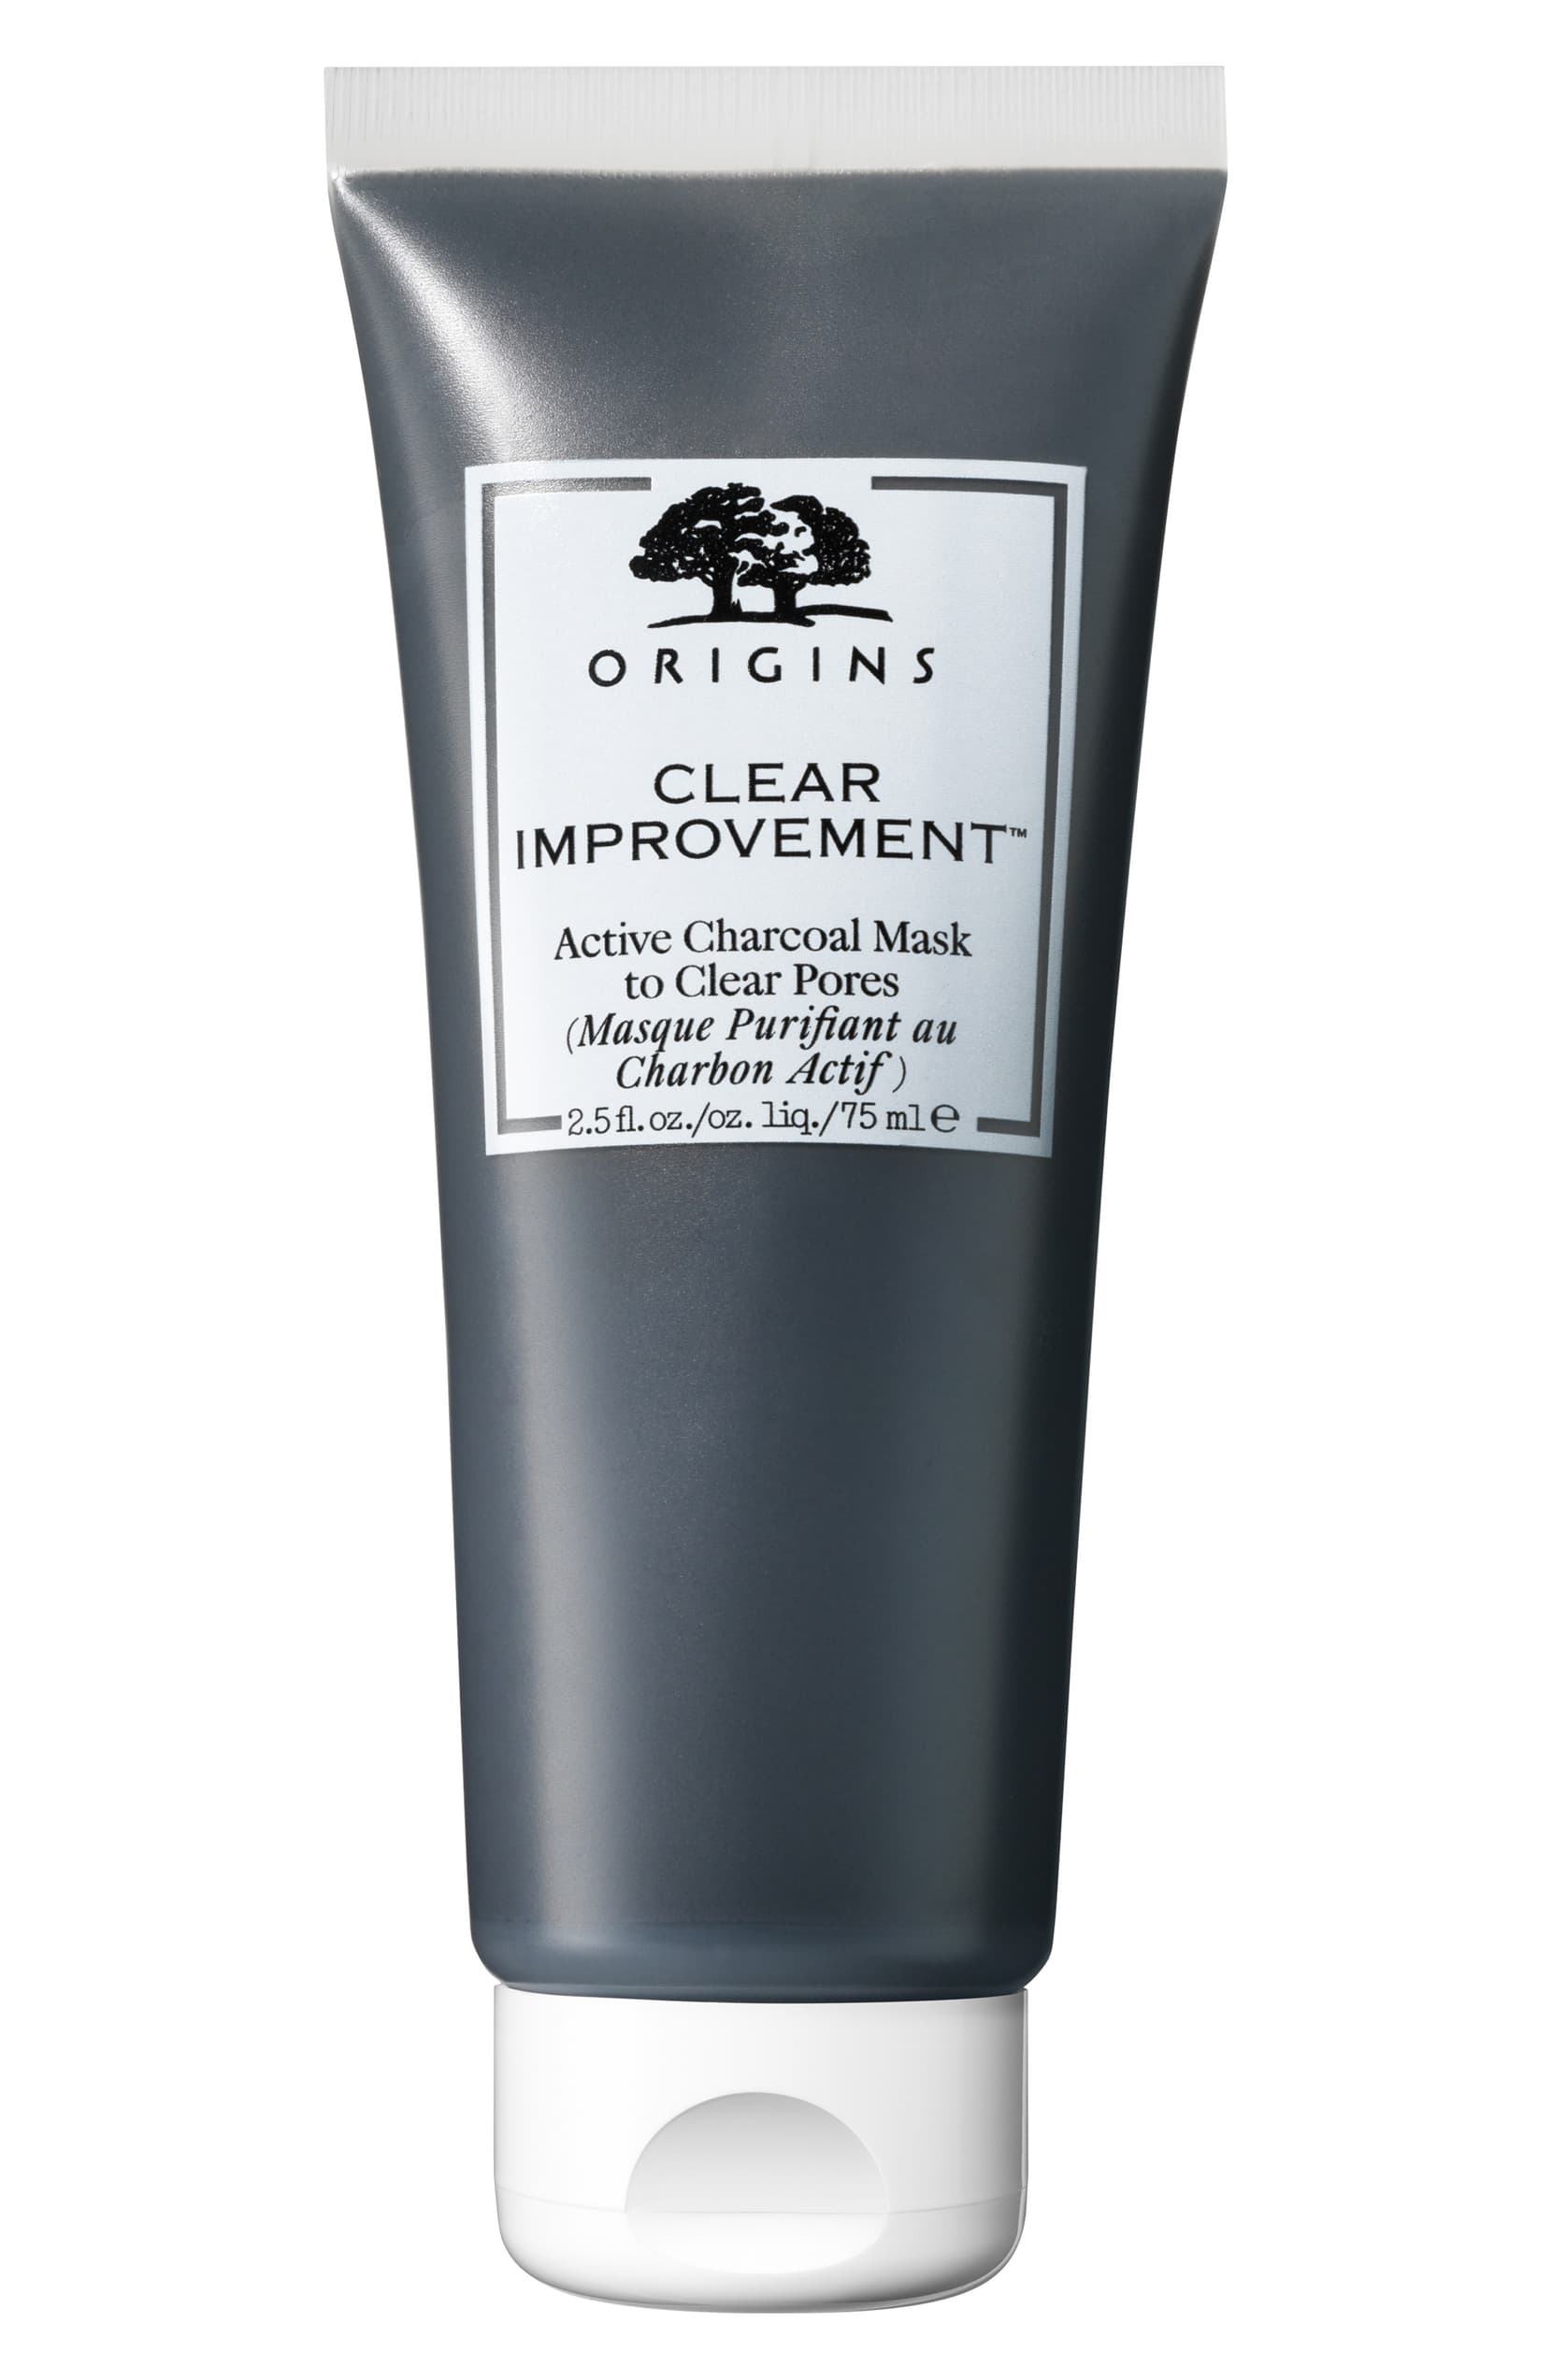 Origins Clear Improvement Active Charcoal Mask to Clear Pores - eCosmeticWorld